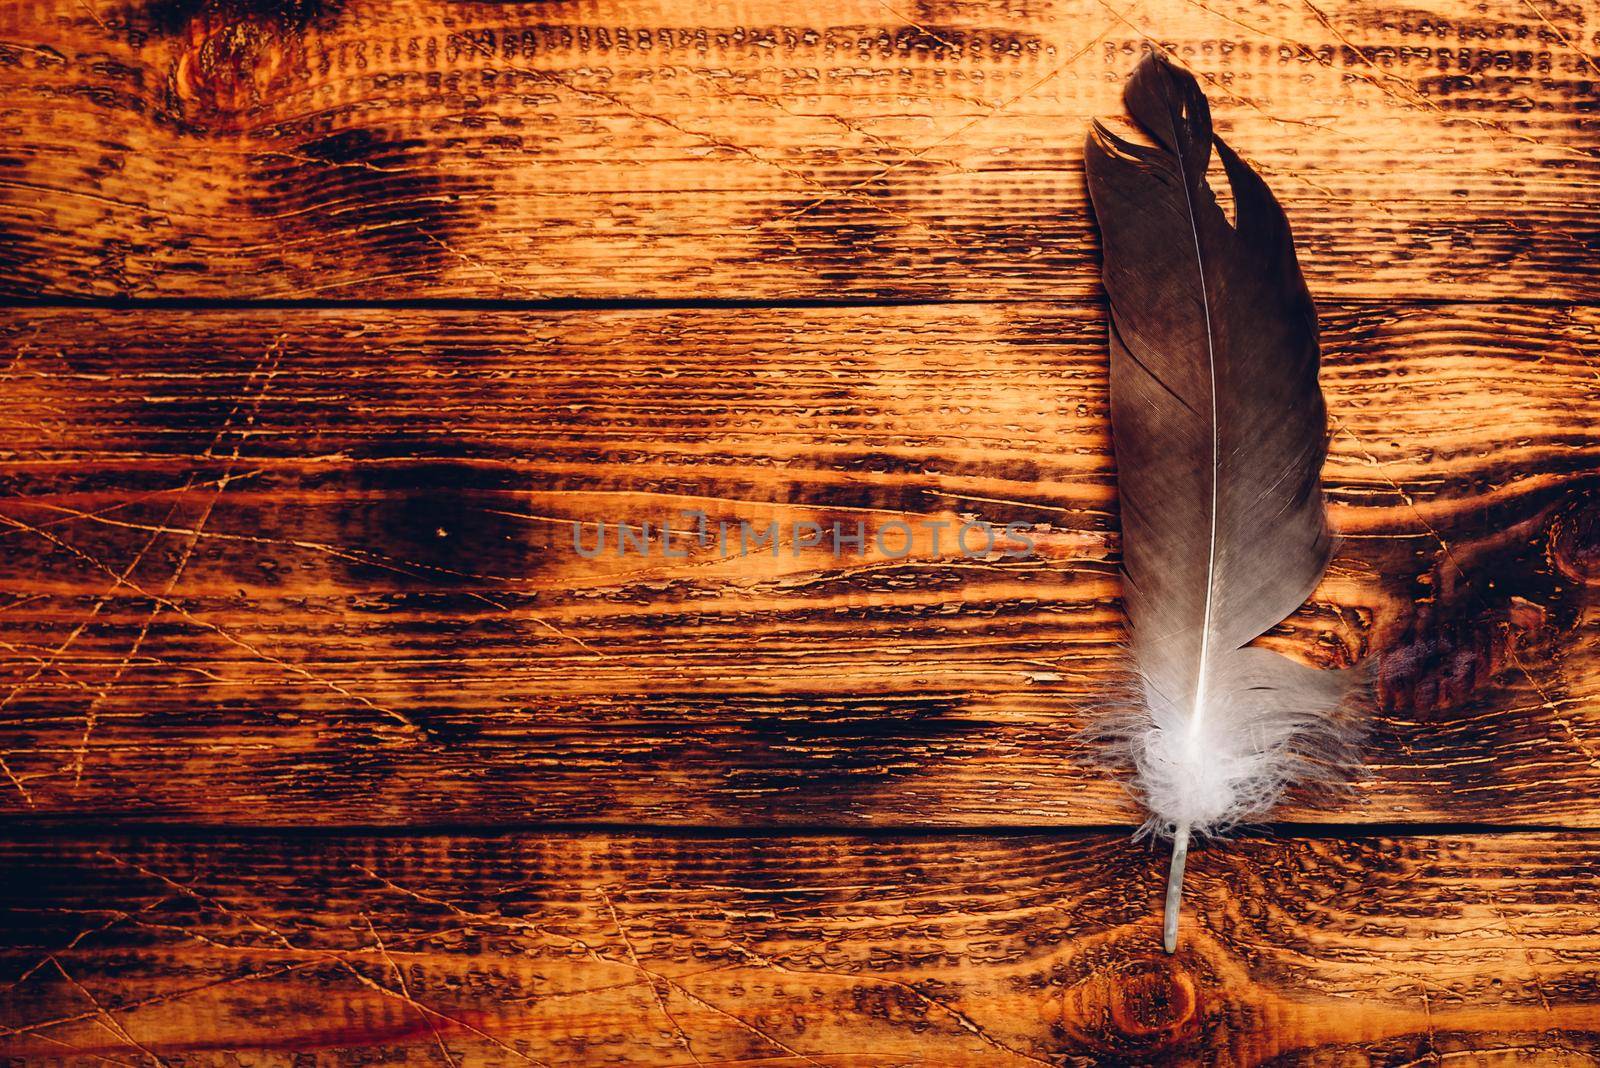 Hawk feather over wooden table by Seva_blsv